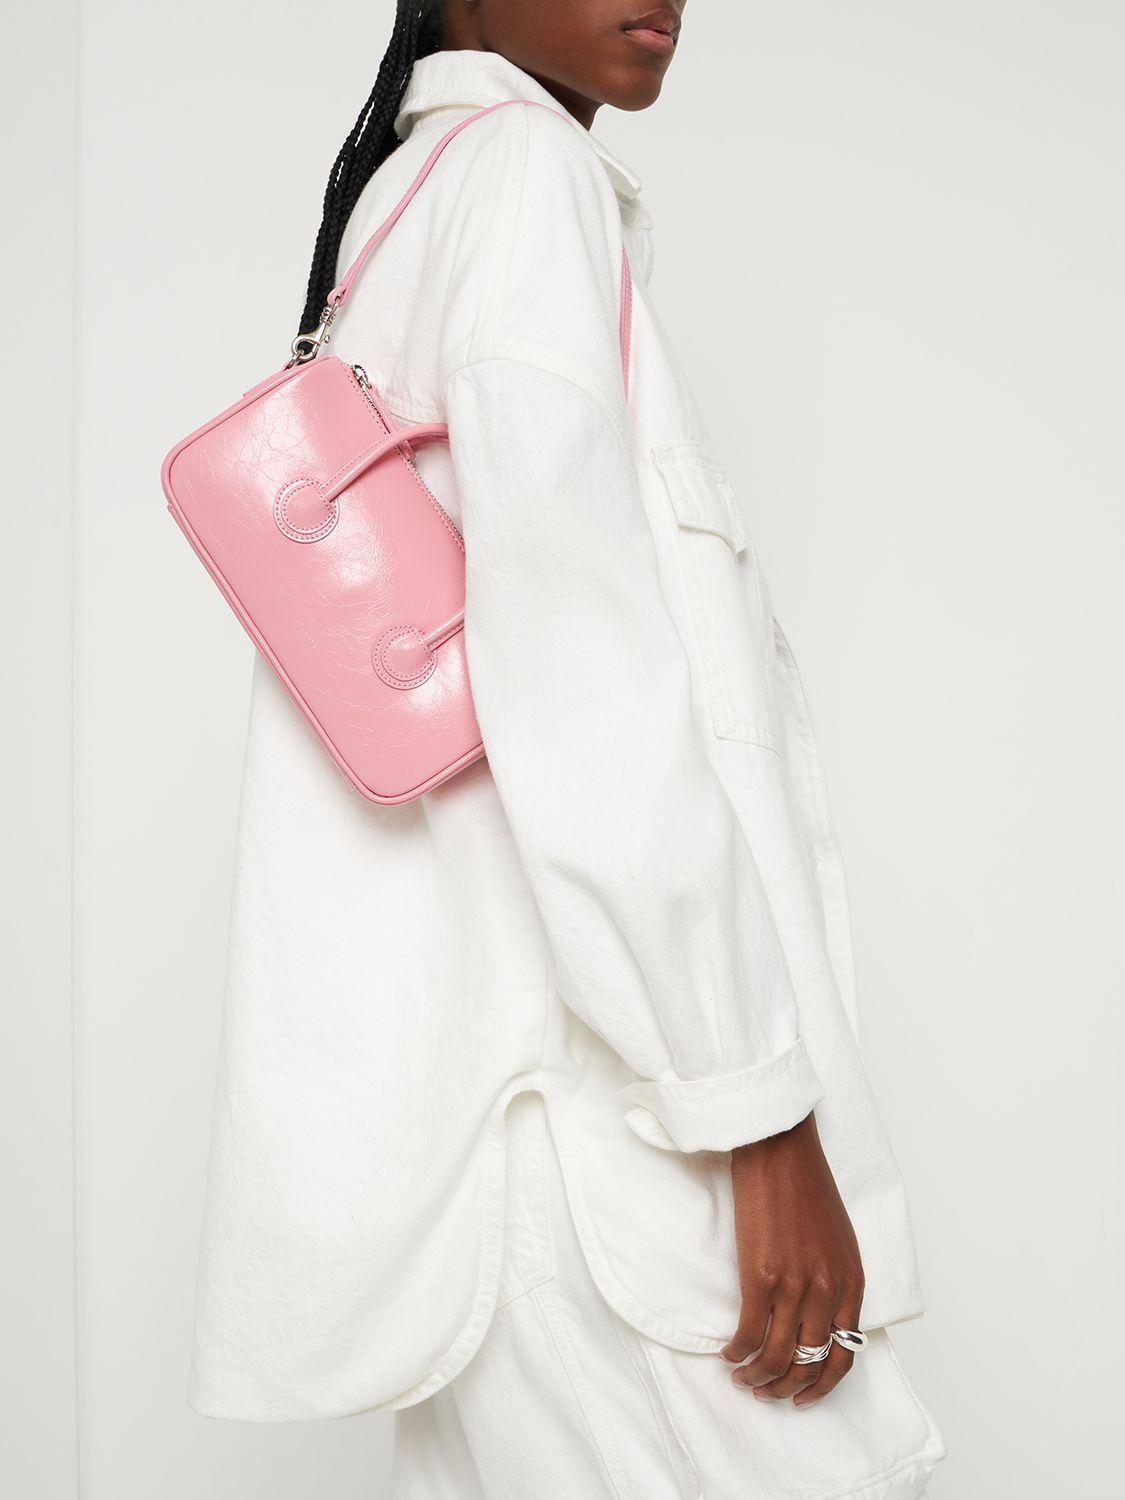 Marge Sherwood Log Leather Top Handle Bag In Candy Pink